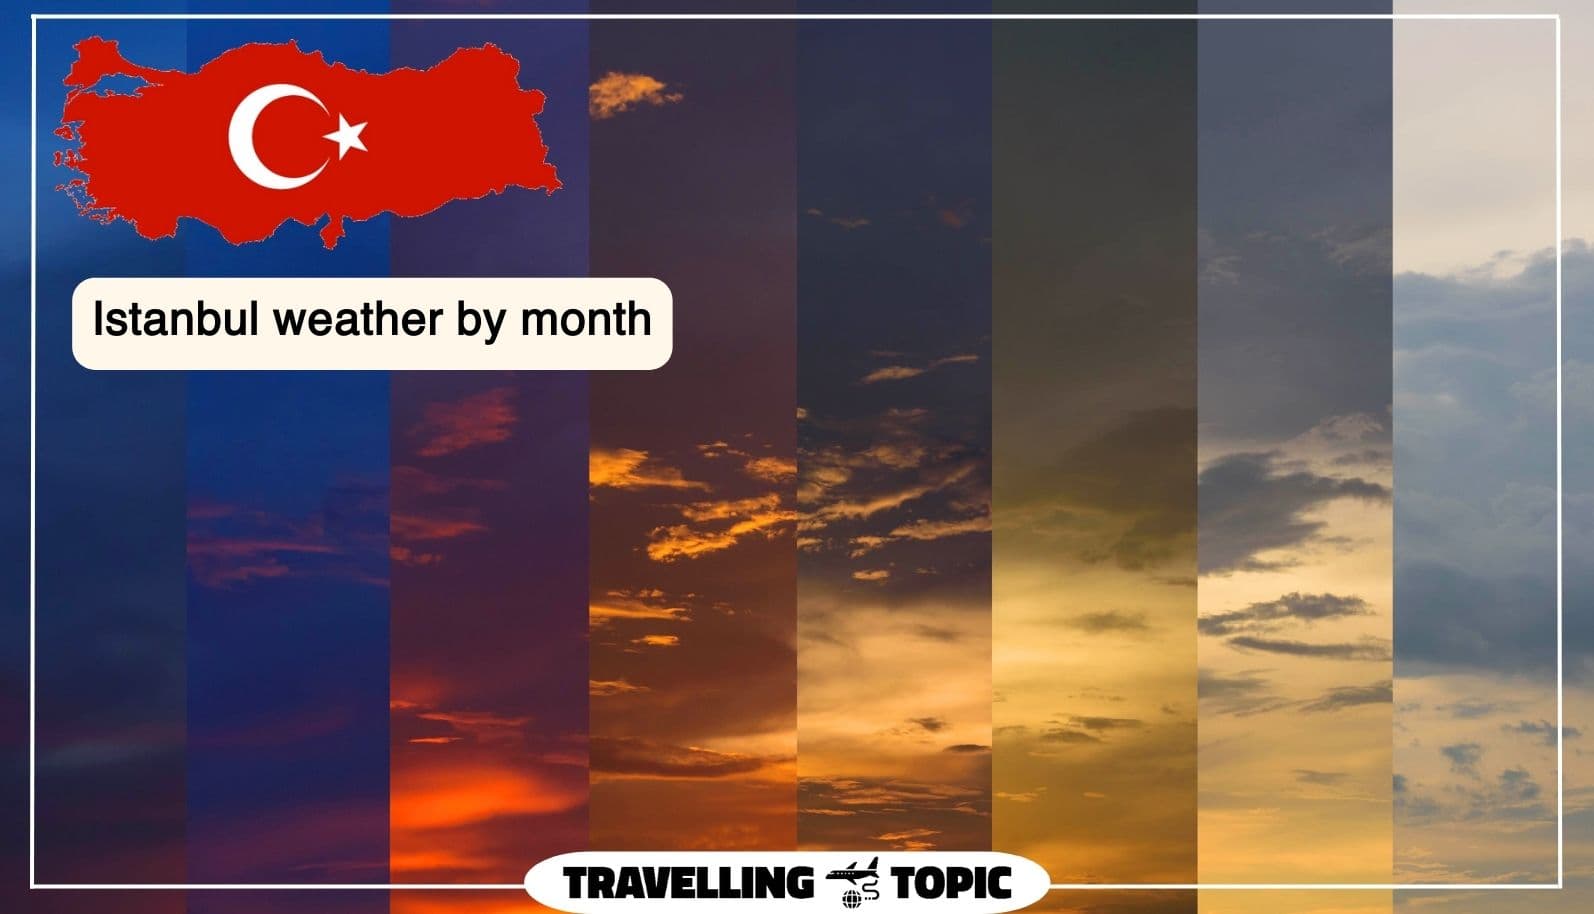 Istanbul weather by month